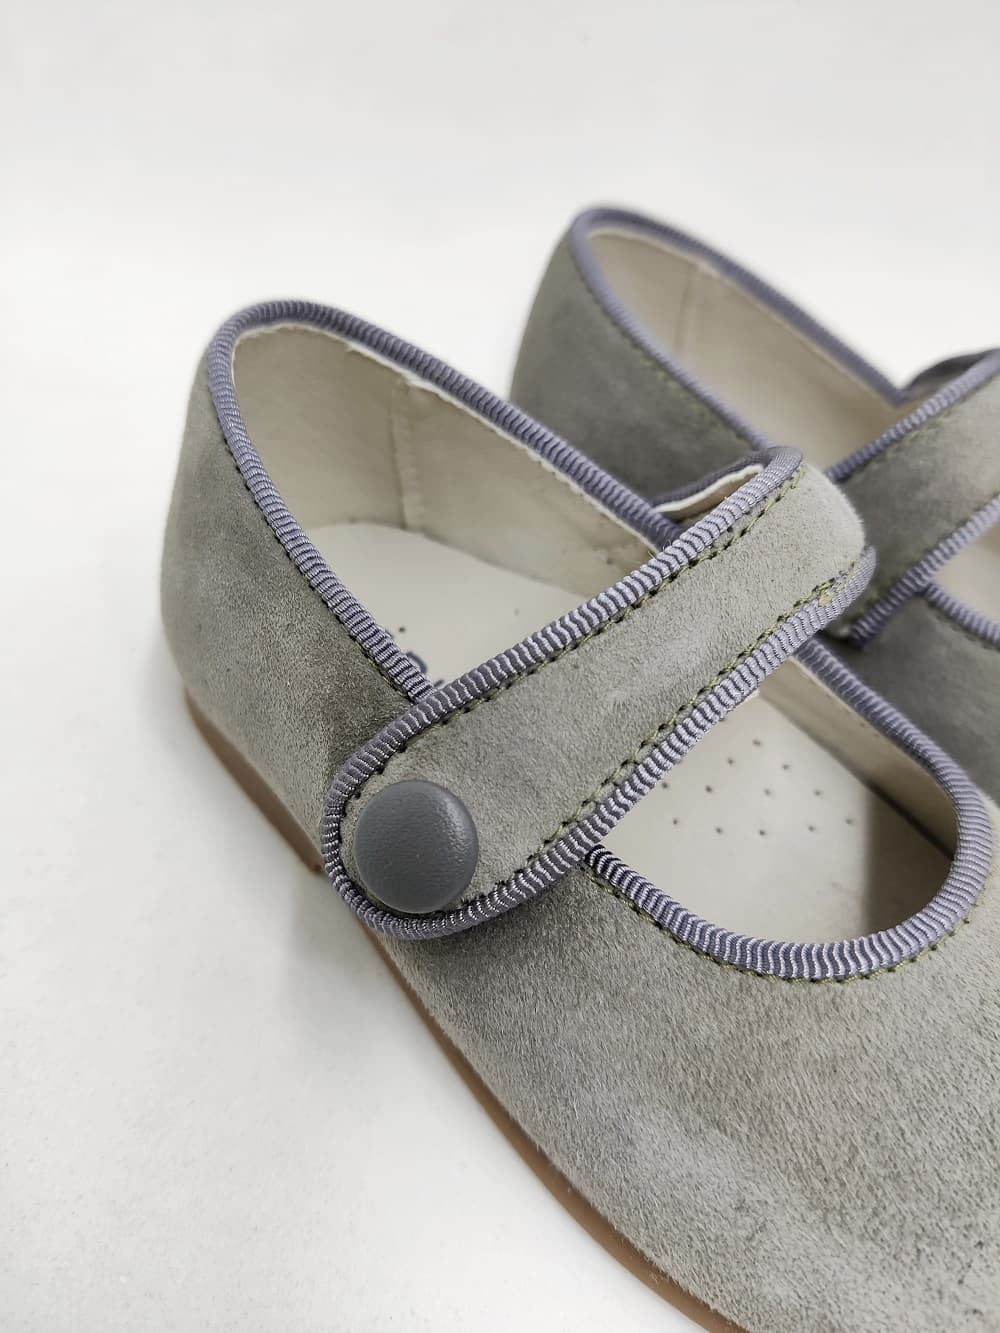 Pirufin (Piruflex) Mary Janes for baby girls in Gray suede - Image 4